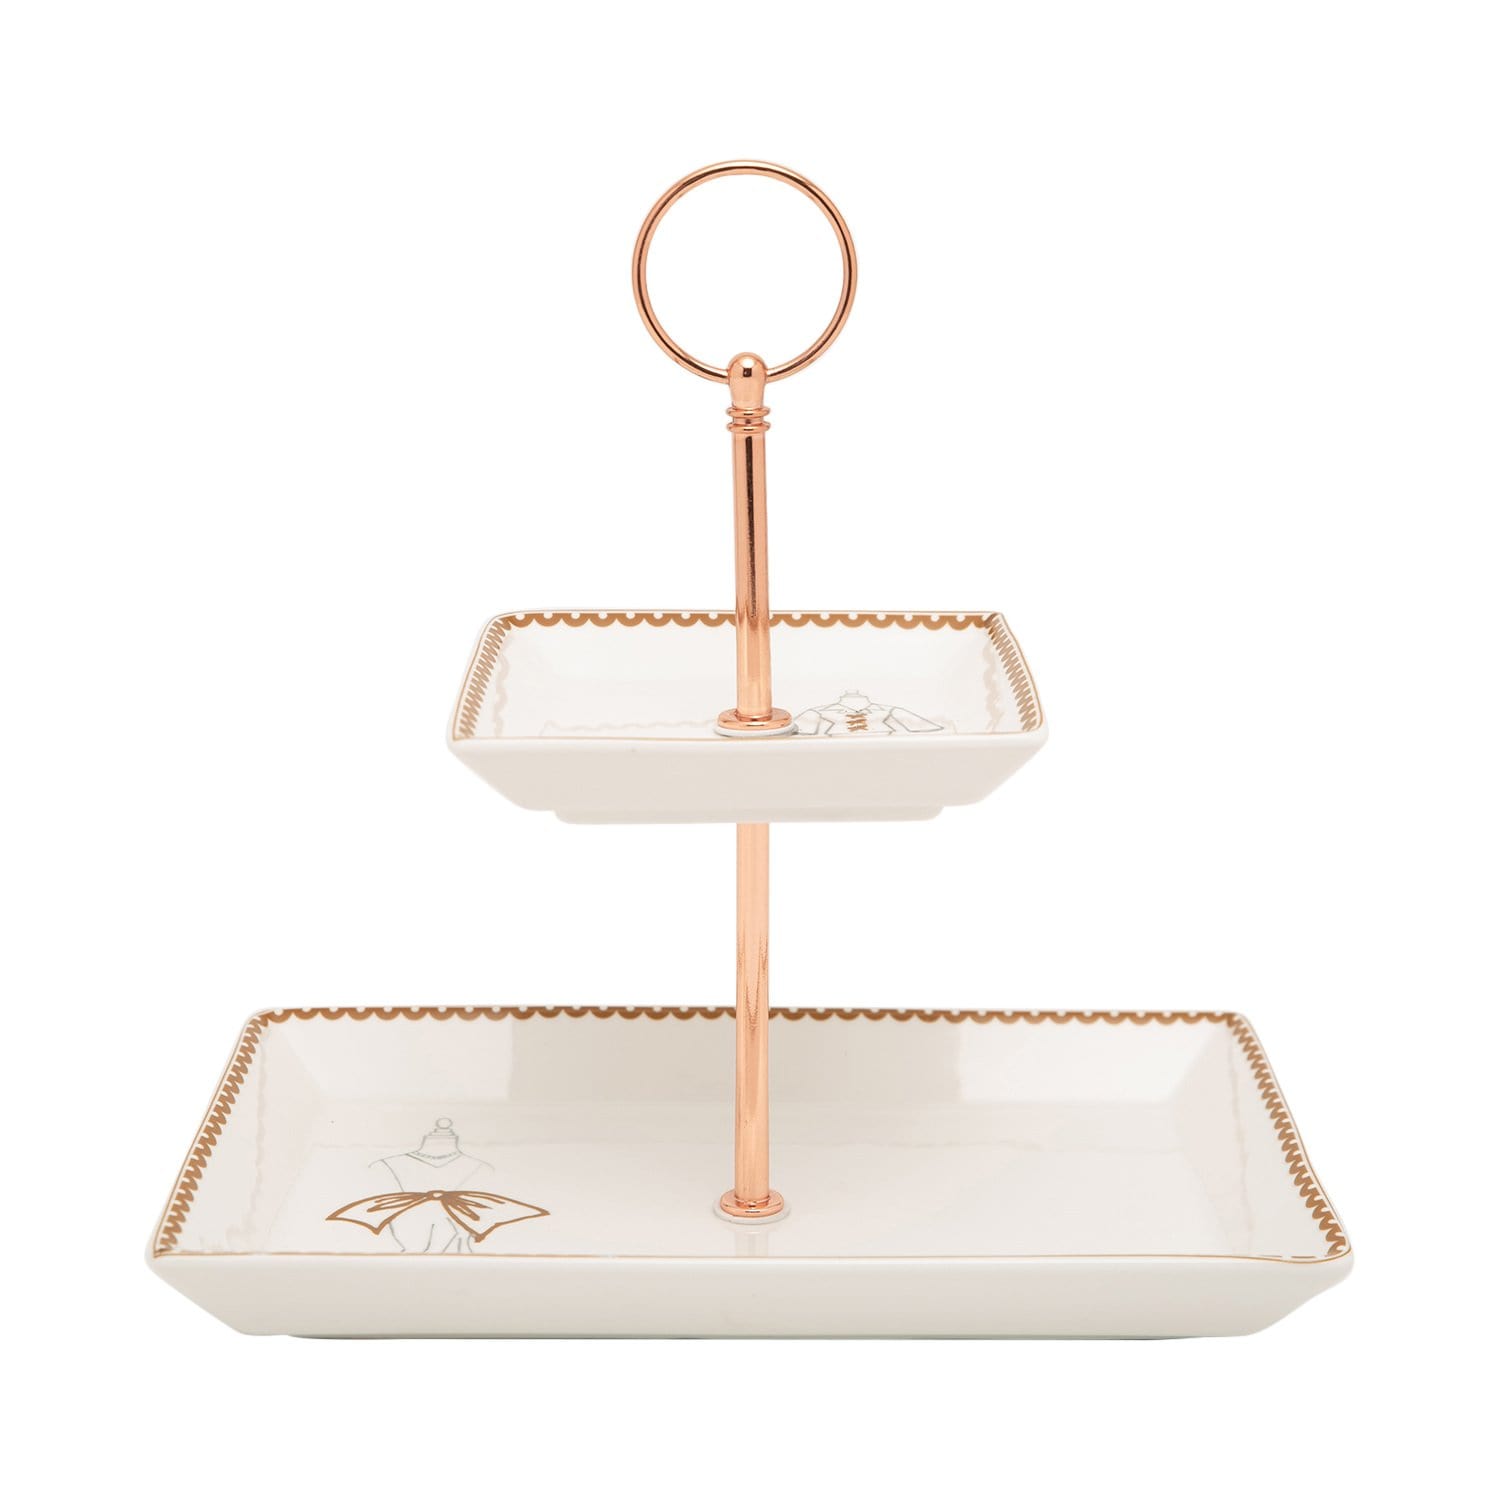 L'atelier FB Dress 2 Levels Square Plate with Holder - TC 4713 015 - Jashanmal Home